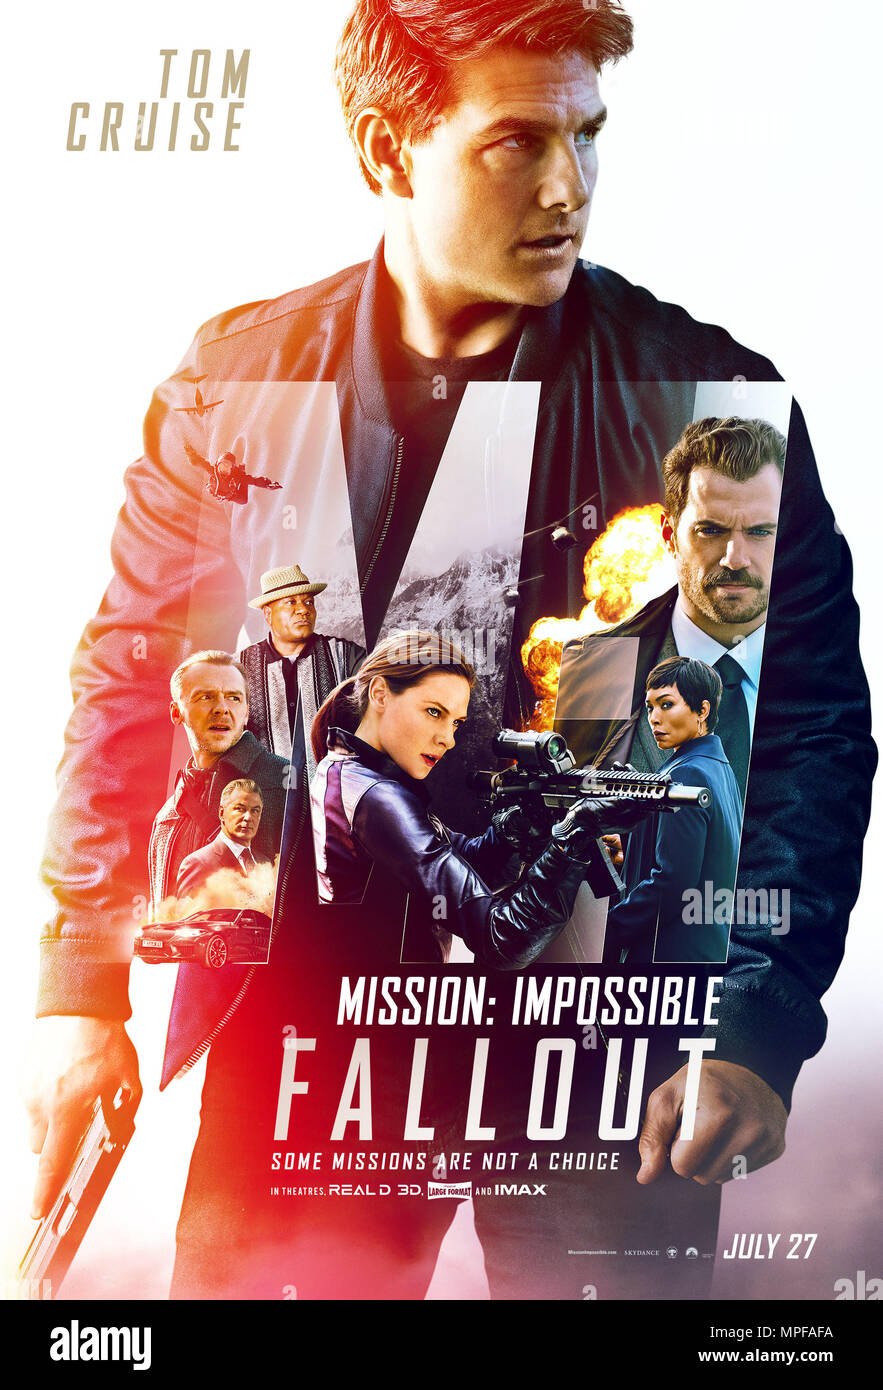 RELEASE DATE: July 27, 2018 TITLE: Mission: Impossible - Fallout STUDIO: Paramount Pictures DIRECTOR: Christopher McQuarrie PLOT: Ethan Hunt and his IMF team, along with some familiar allies, race against time after a mission gone wrong. STARRING: TOM CRUISE as Ethan Hunt poster art. (Credit Image: © Paramount Pictures/Entertainment Pictures) Stock Photo